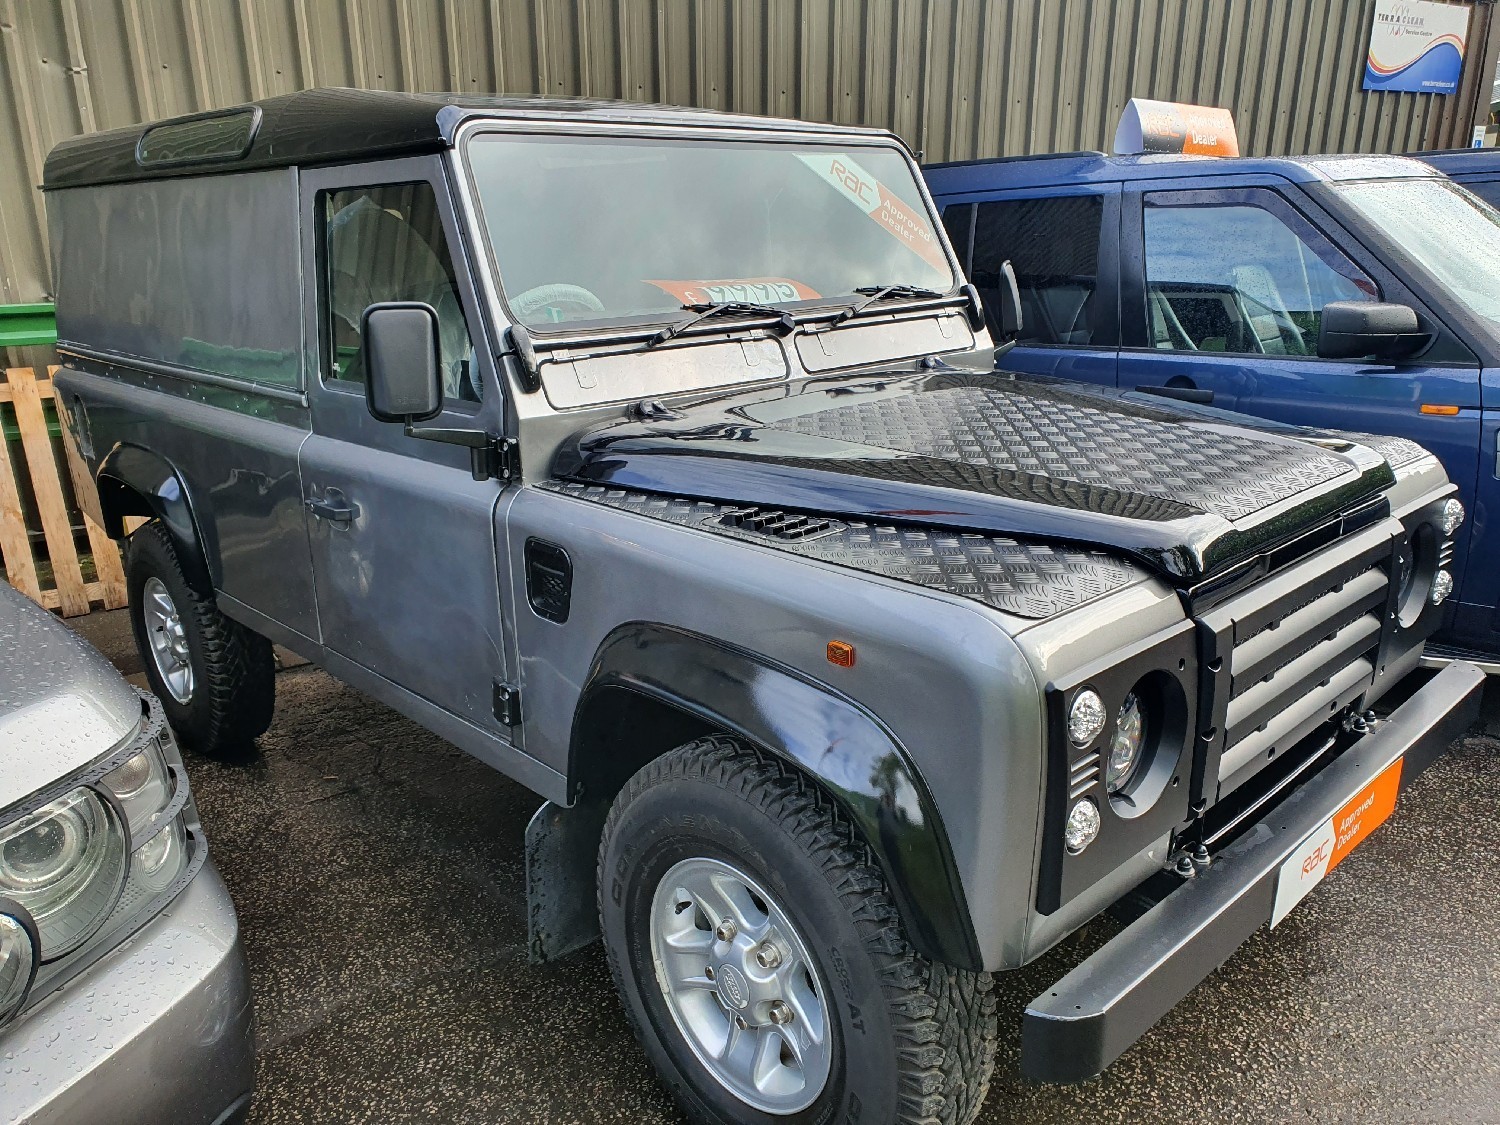 Used LAND ROVER DEFENDER 110 in Keighley, West Yorkshire